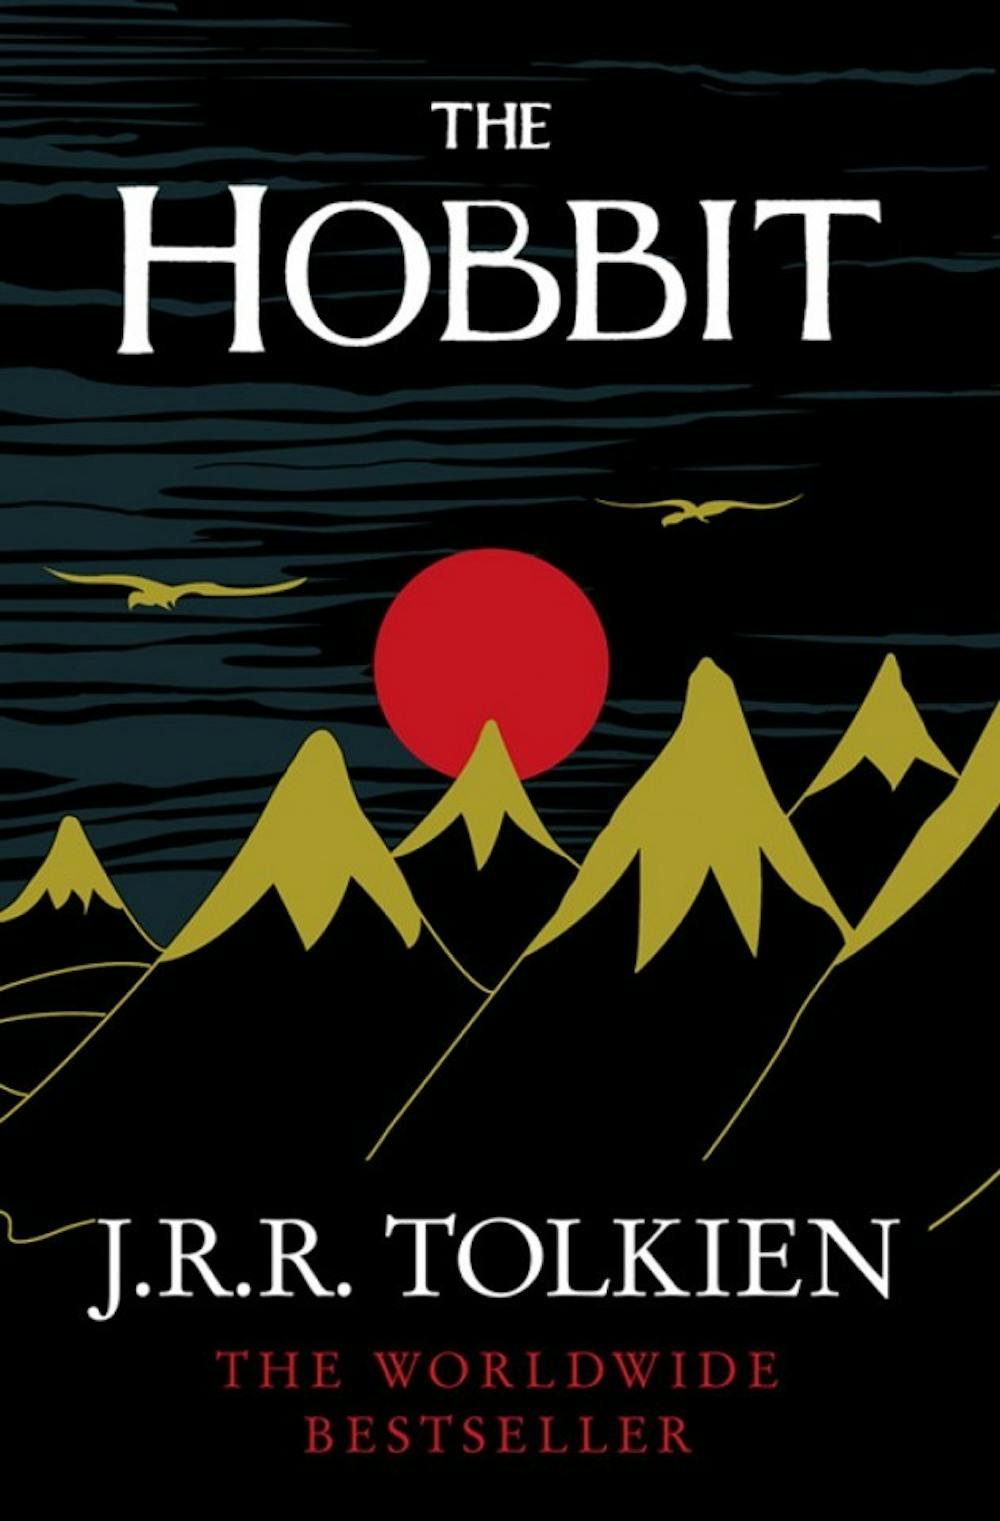 J.R.R. Tolkien&rsquo;s classic novel has been filling people&rsquo;s
imaginations for more than seven decades.
It&rsquo;s one of the many films to appear on the big screen
based on books this year and the conclusion,
featuring the Battle of the Five Armies, should be the best
film yet. Courtesy of Houghton Mifflin and Harcourt&nbsp;